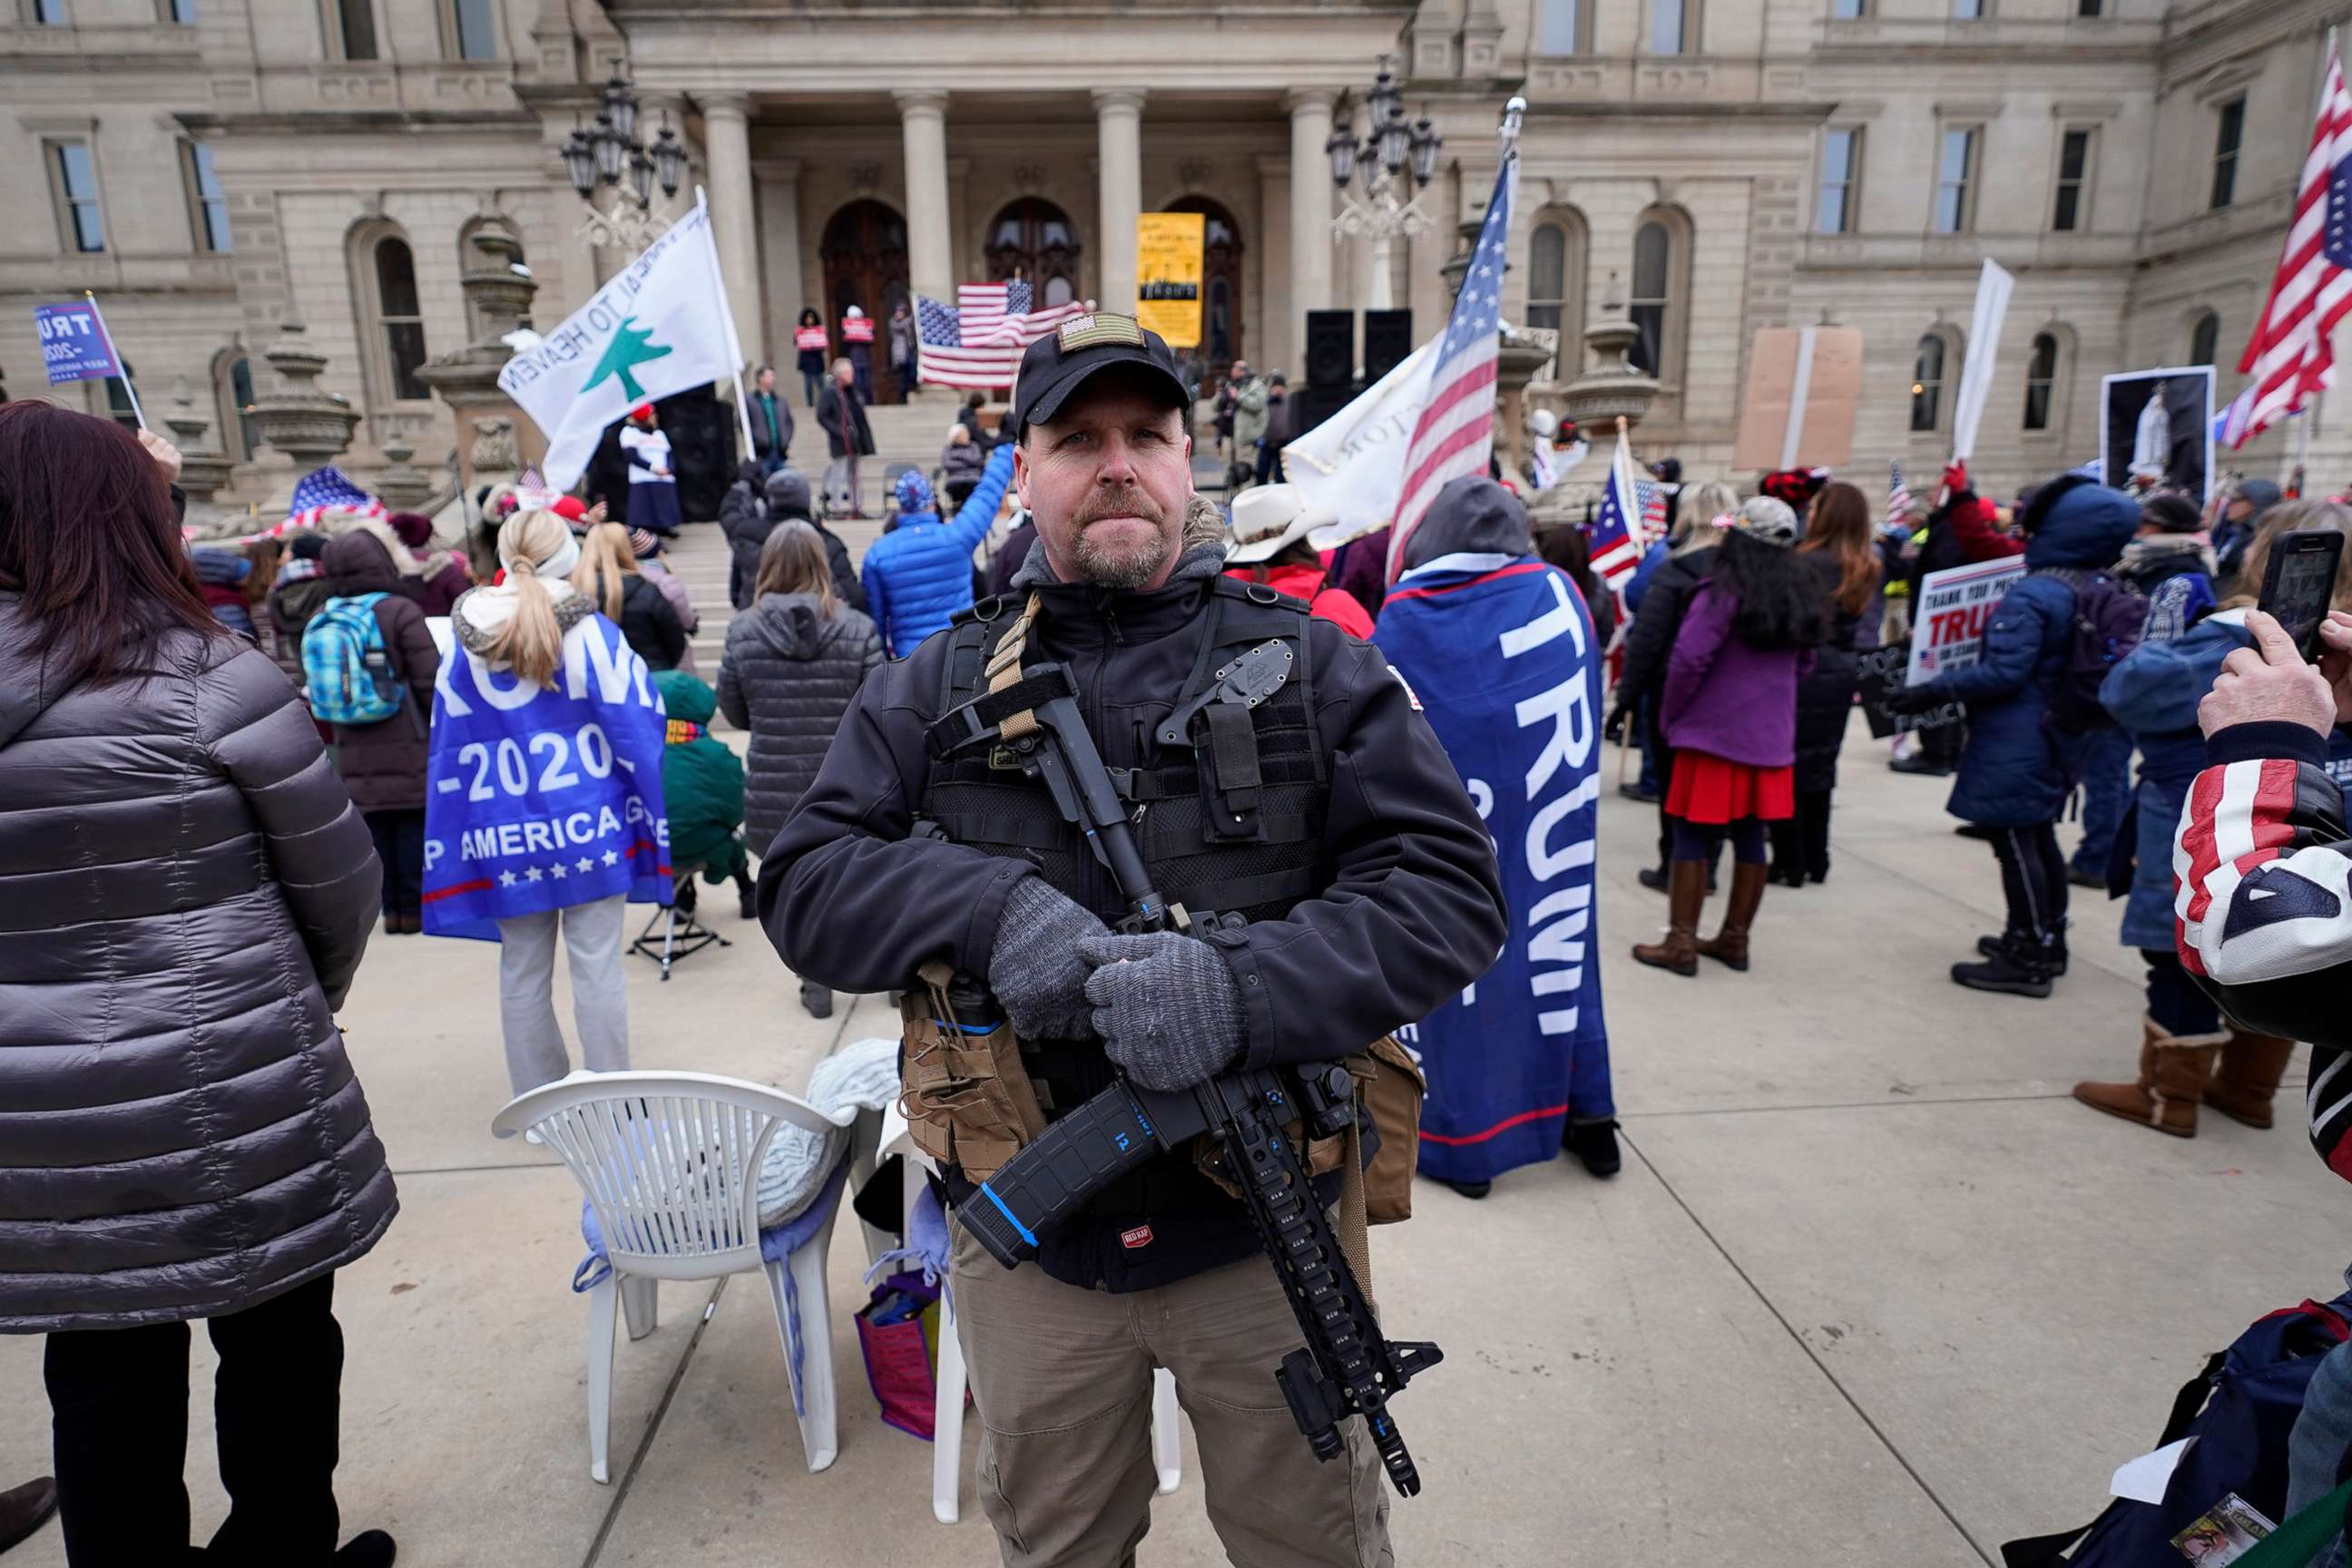 PHOTO: A man carries a rifle during a rally in support of President Donald Trump at the state capitol in Lansing, Mich., Jan. 6, 2021.